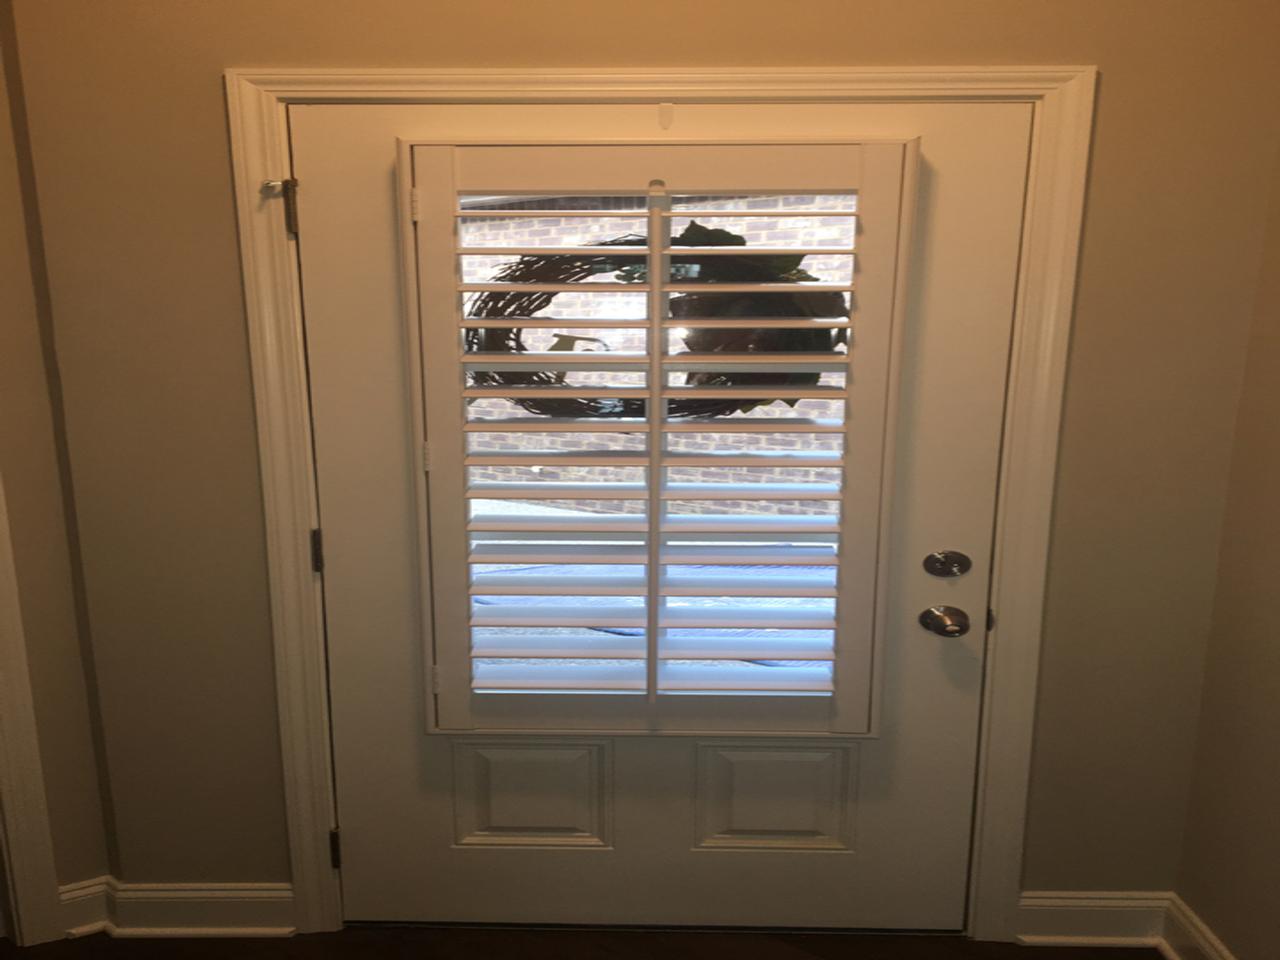 Door with plantation shutters on the glass portion